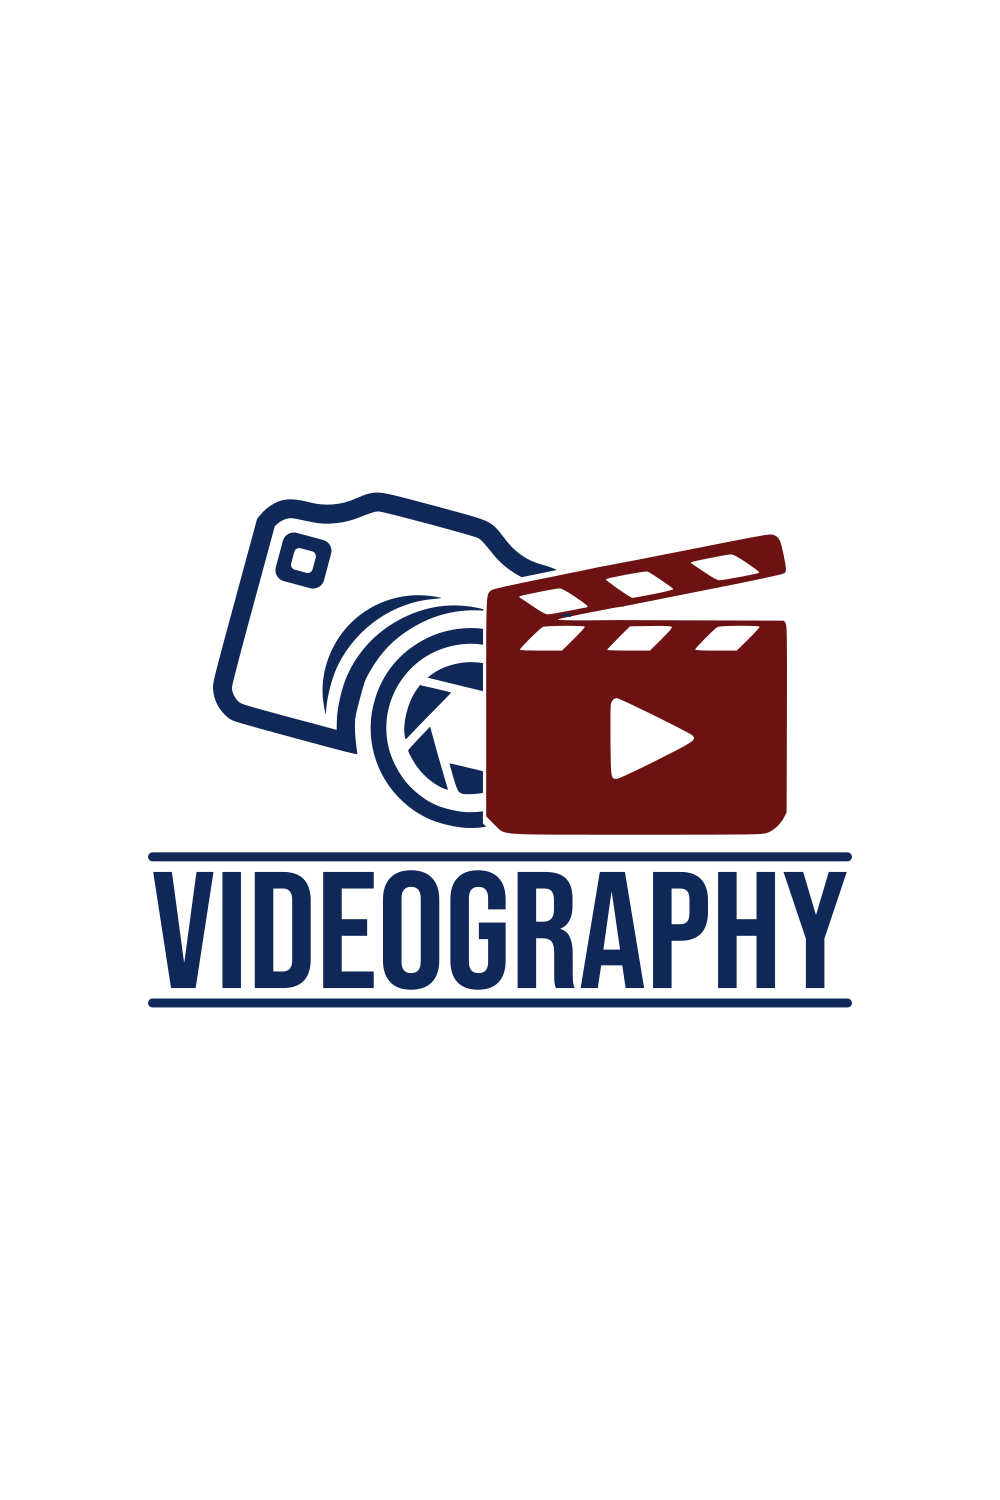 Videography Logo Sign Design Graphic by leamsign · Creative Fabrica